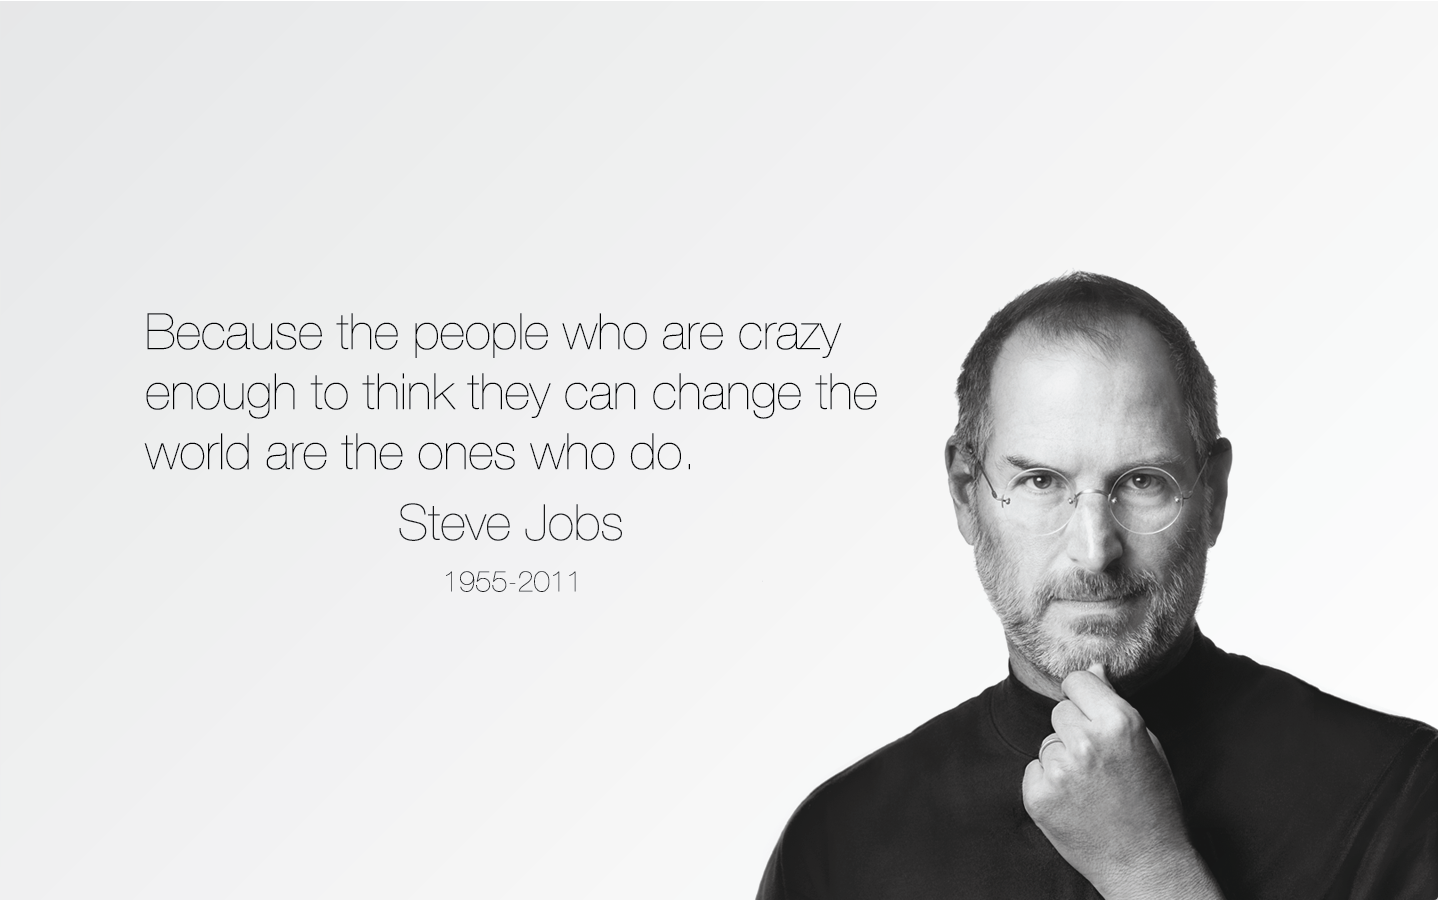 Steve Jobs Motivational Inspirational Quote Wallpaper For Job And